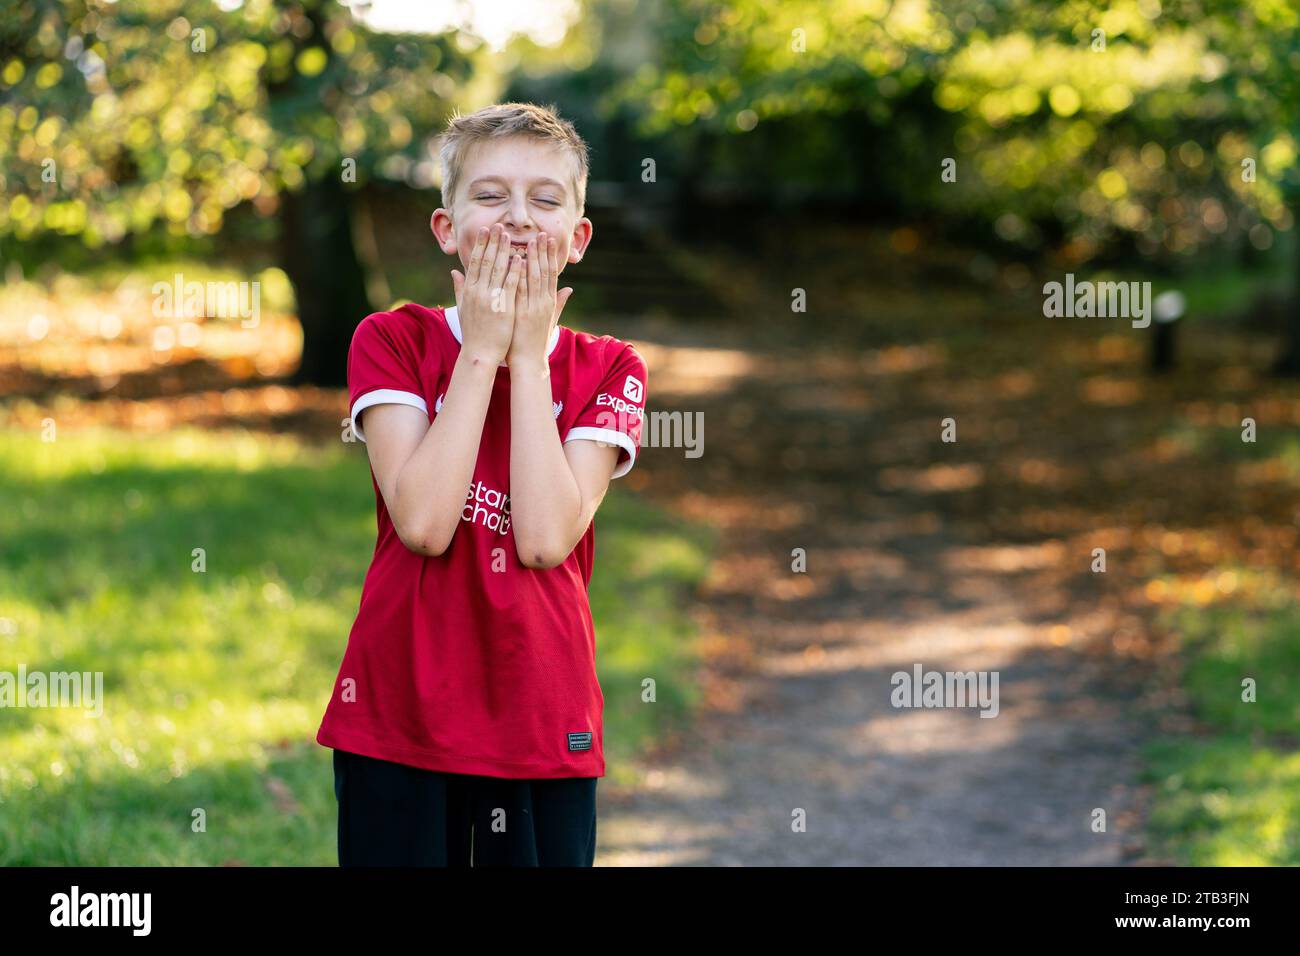 A happy or surprised child in a Liverpool jersey in a park Stock Photo